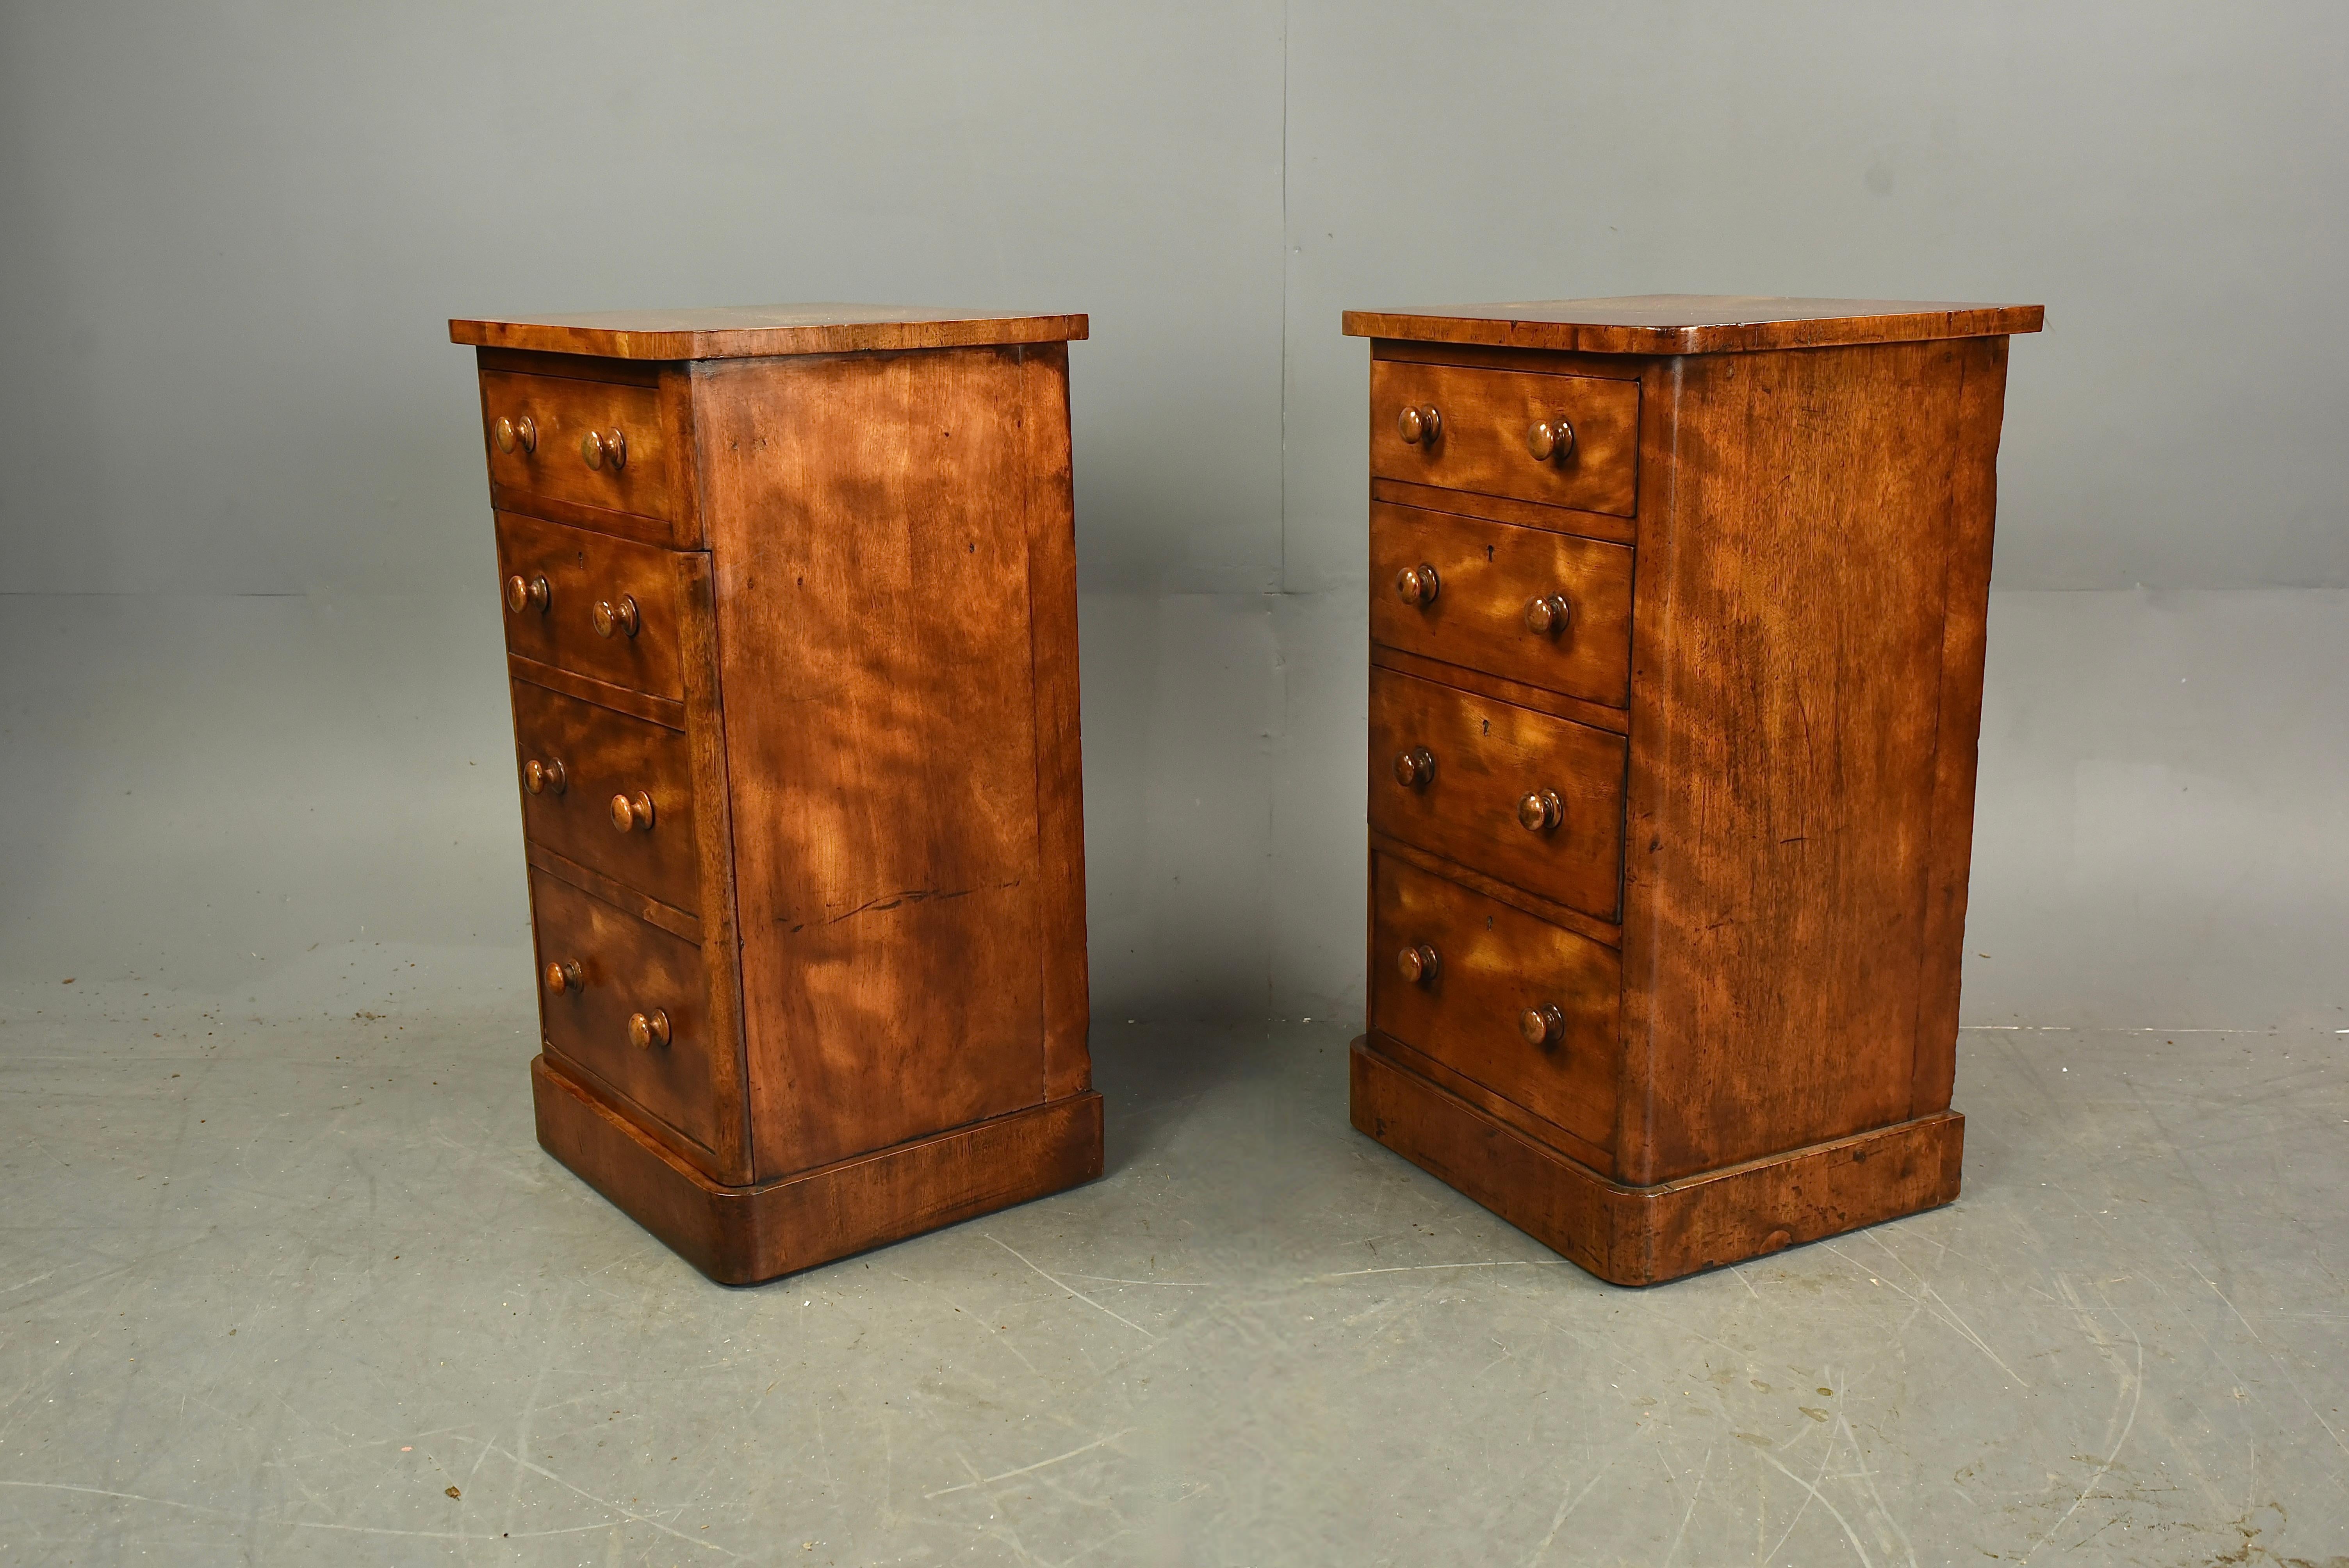 English 19th century pair of Antique satin walnut bedside chests of drawers nite stands